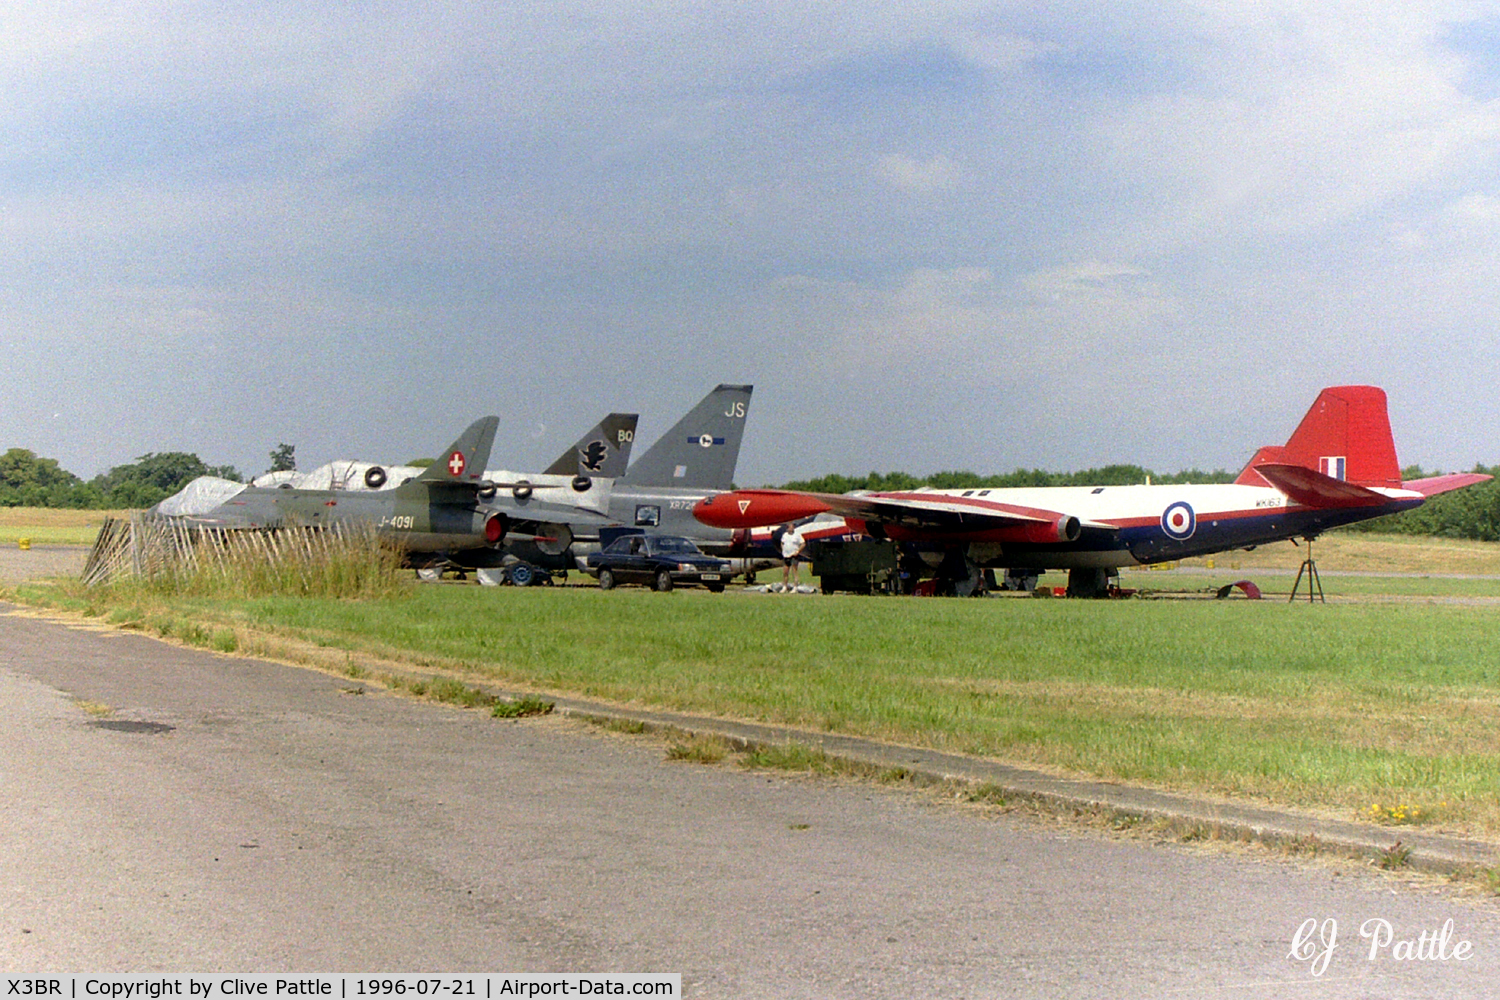 X3BR Airport - Line up of Lightning Preservation Group and Phoenix Aviation at Bruntingthorpe X3BR. Includes Lightning F.6 XR728 and XS904 plus Canberra WK163 and Hunter F.58 J-4091